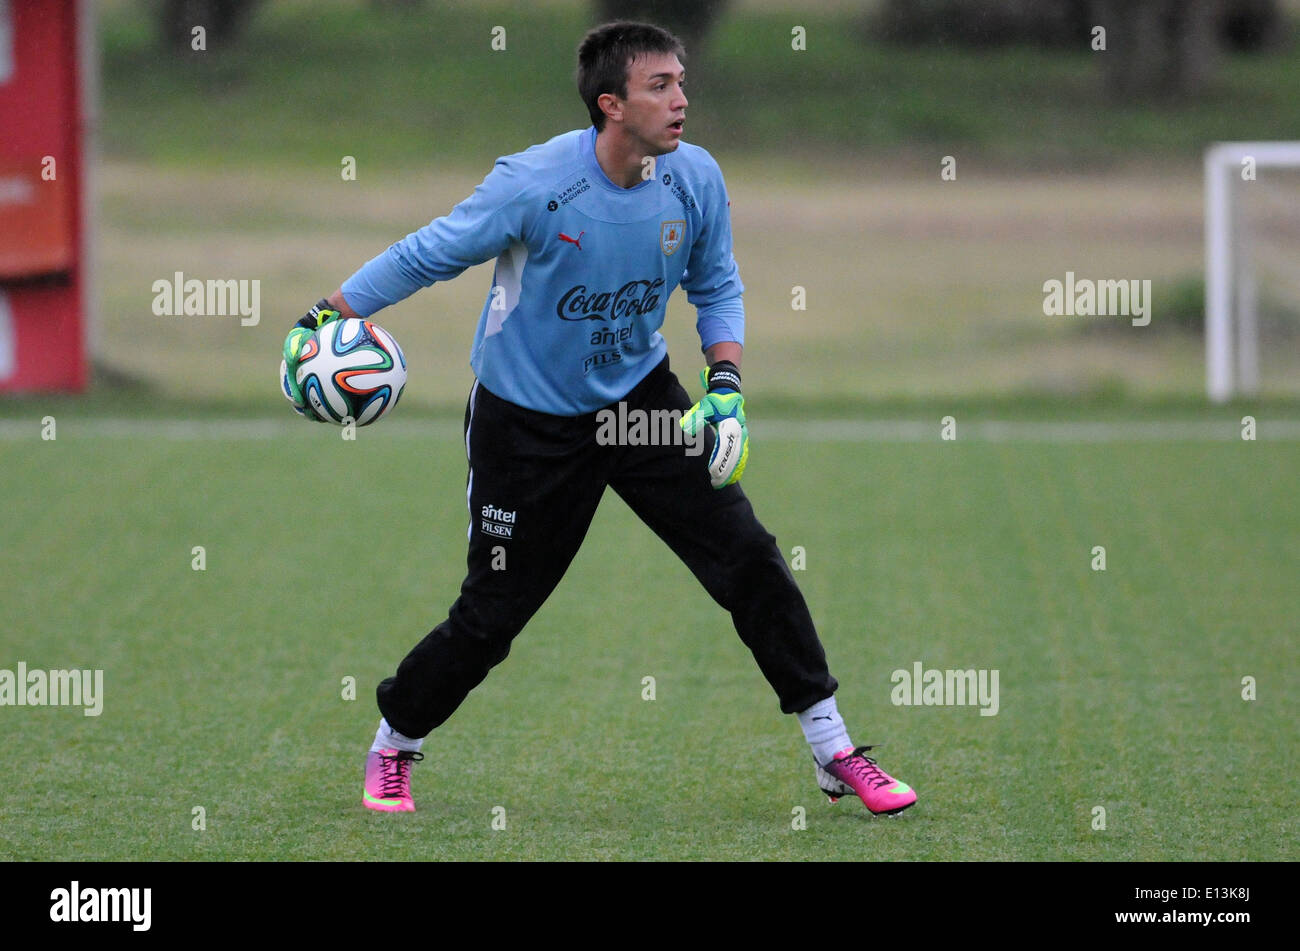 Montevideo, Uruguay. 21st May, 2014. Uruguay's national team goalkeeper Fernando Muslera takes part during a training session before the FIFA World Cup, at Uruguay Celeste complex, in Montevideo, capital of Uruguay, on May 21, 2014. © Nicolas Celaya/Xinhua/Alamy Live News Stock Photo